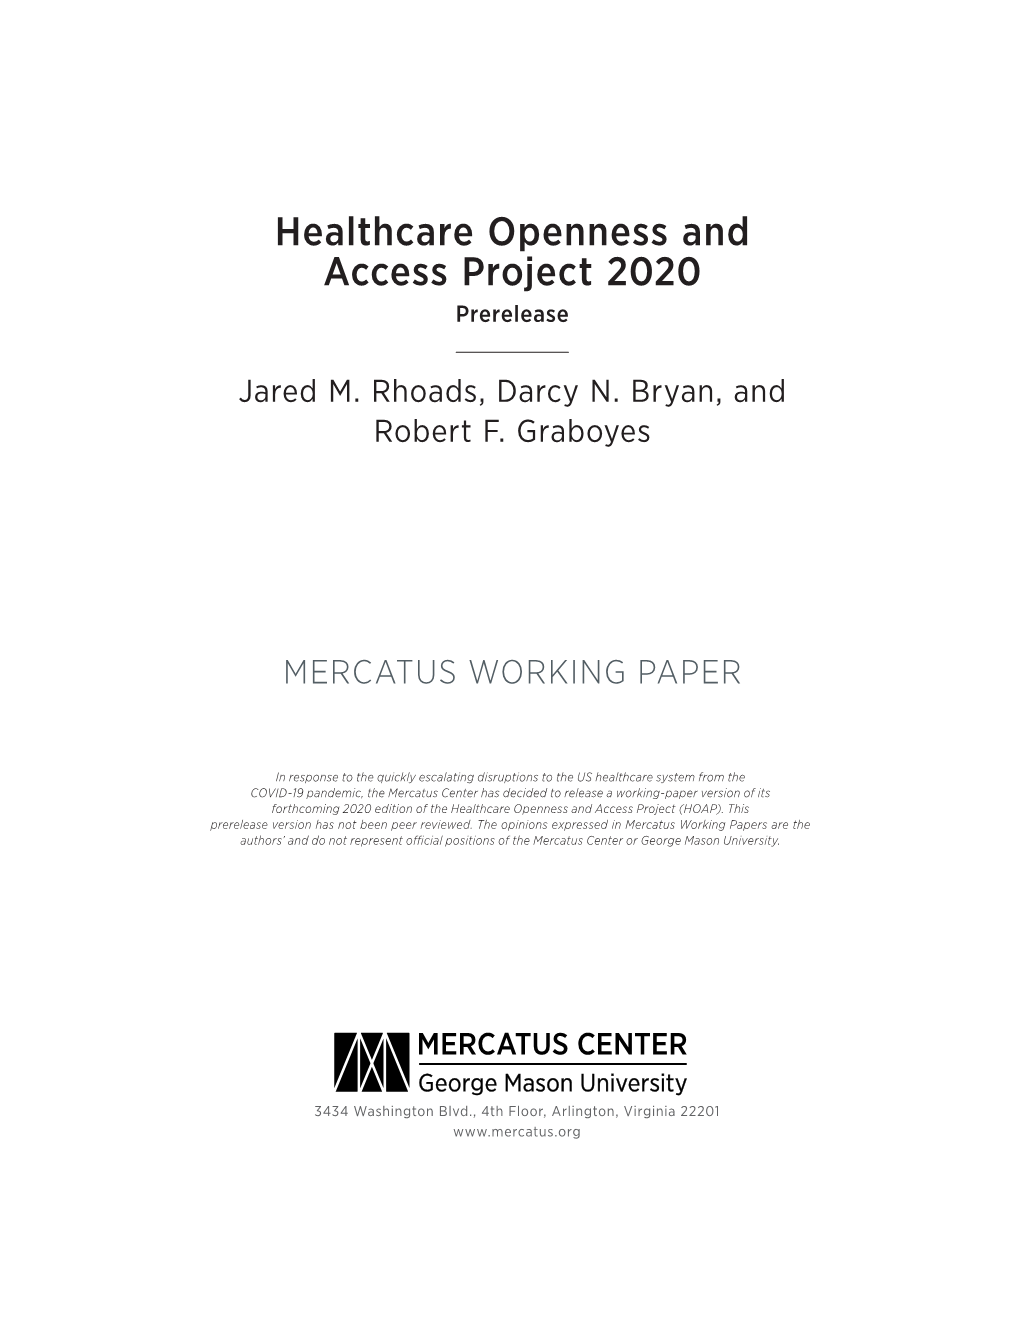 Healthcare Openness and Access Project 2020: Prerelease.” Project Overview, Mercatus Center at George Mason University, Arlington, VA, March 2020